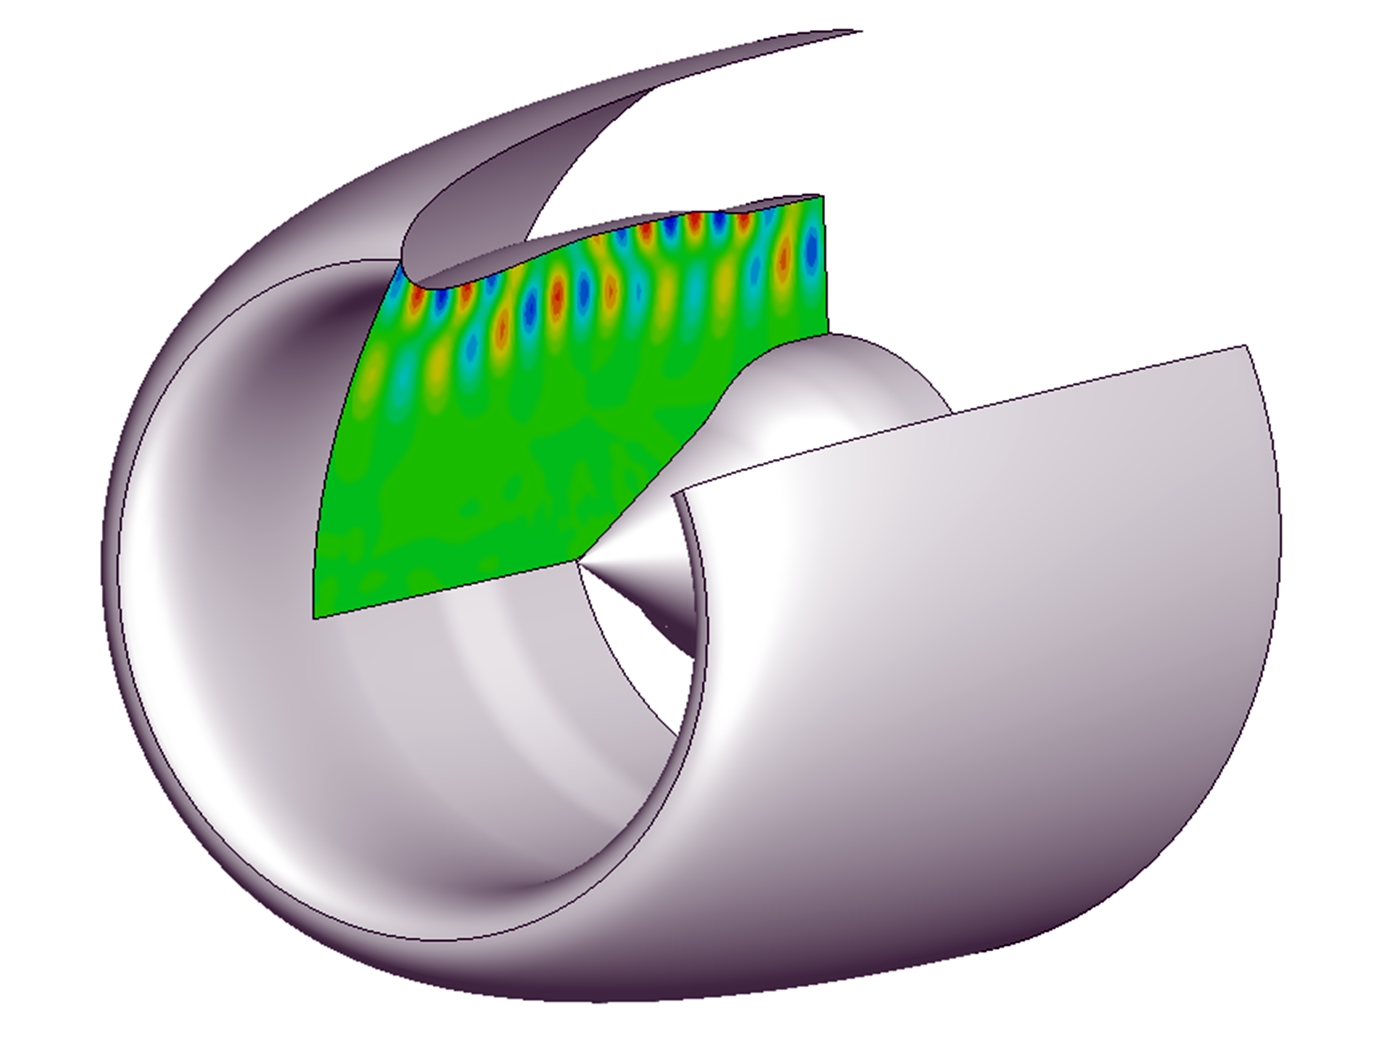 Example inlet duct propagation prediction (related to first invention)